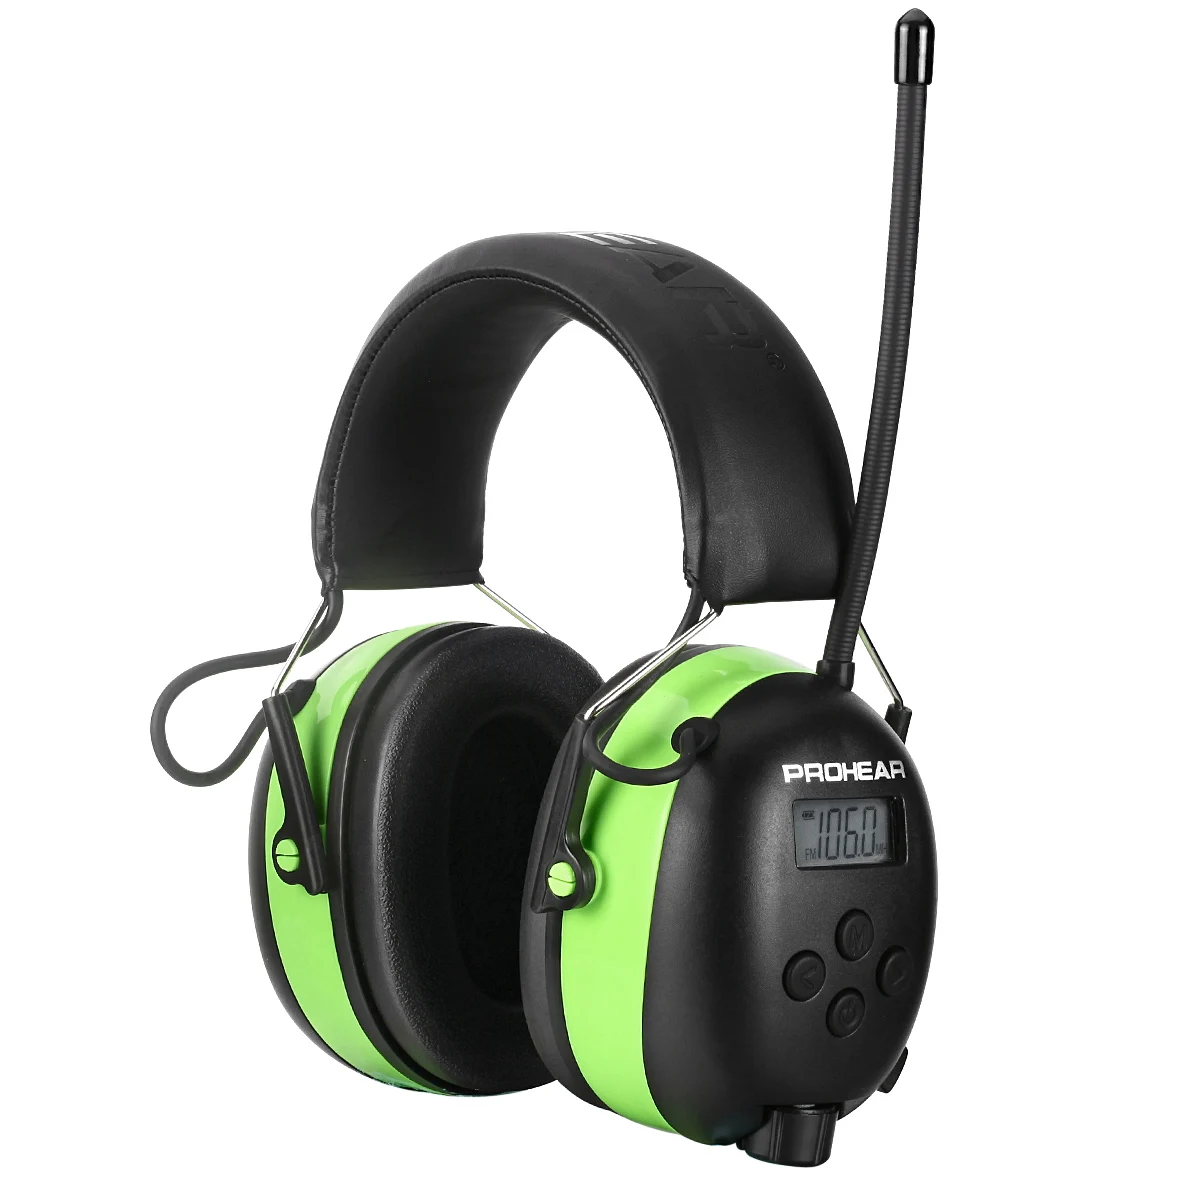 
EM033 Bluetooth Workplace Safety Hearing Protection DAB Radio Ear Muffs for Mowing Lawn 